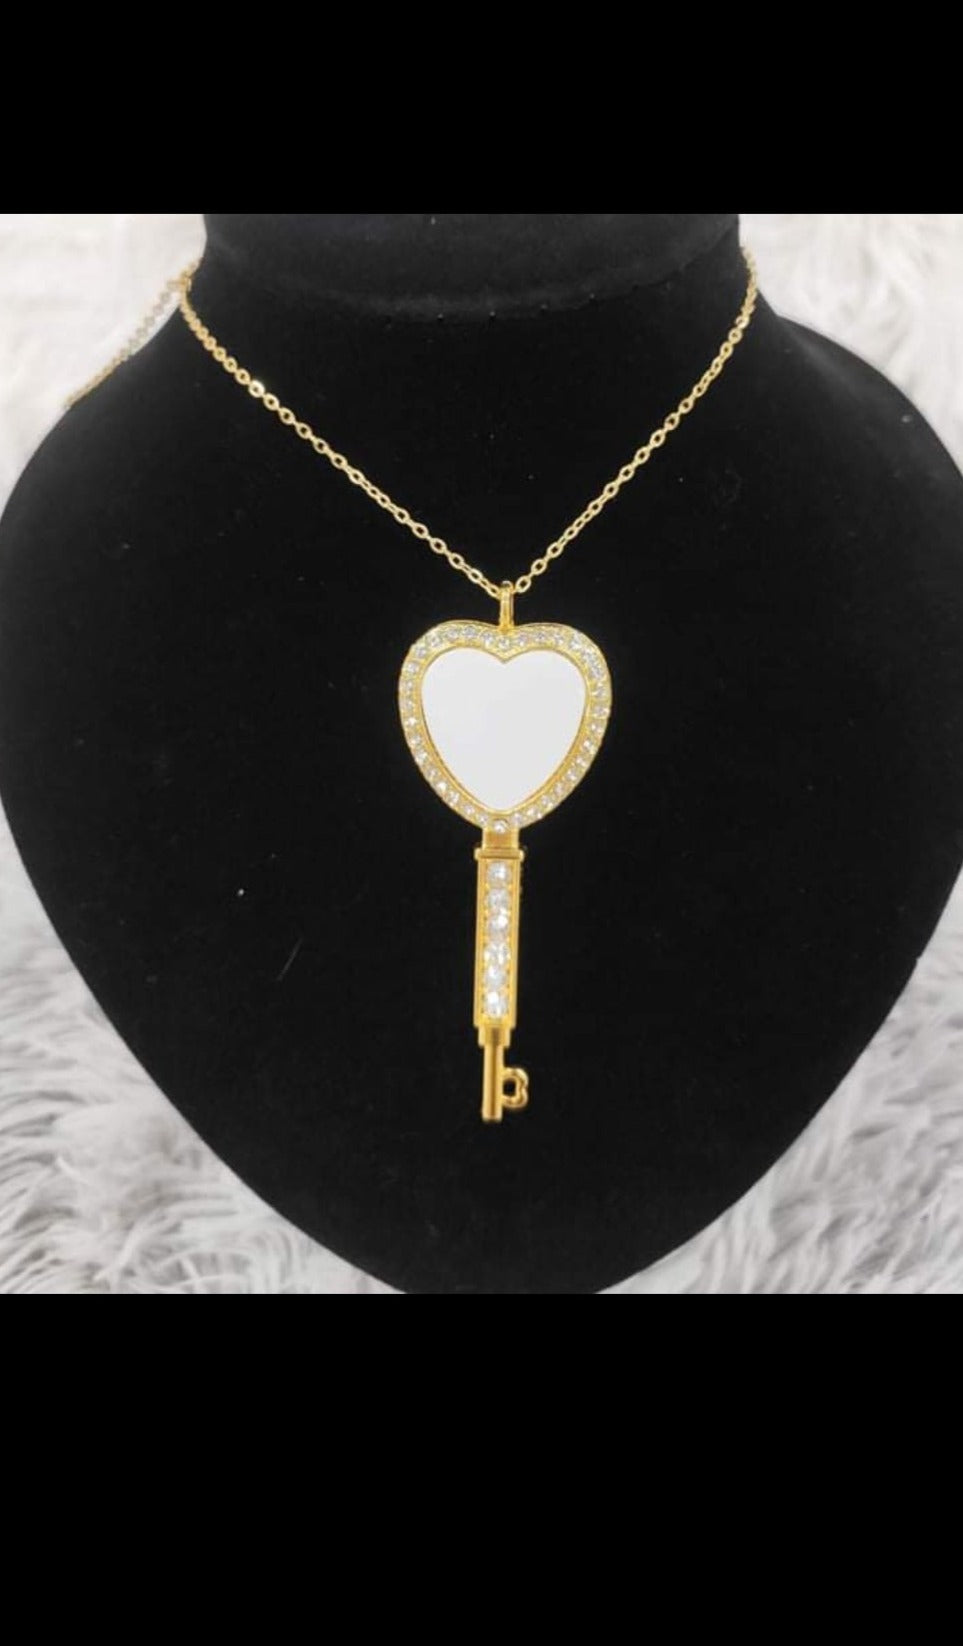 Heart Keychain Necklace